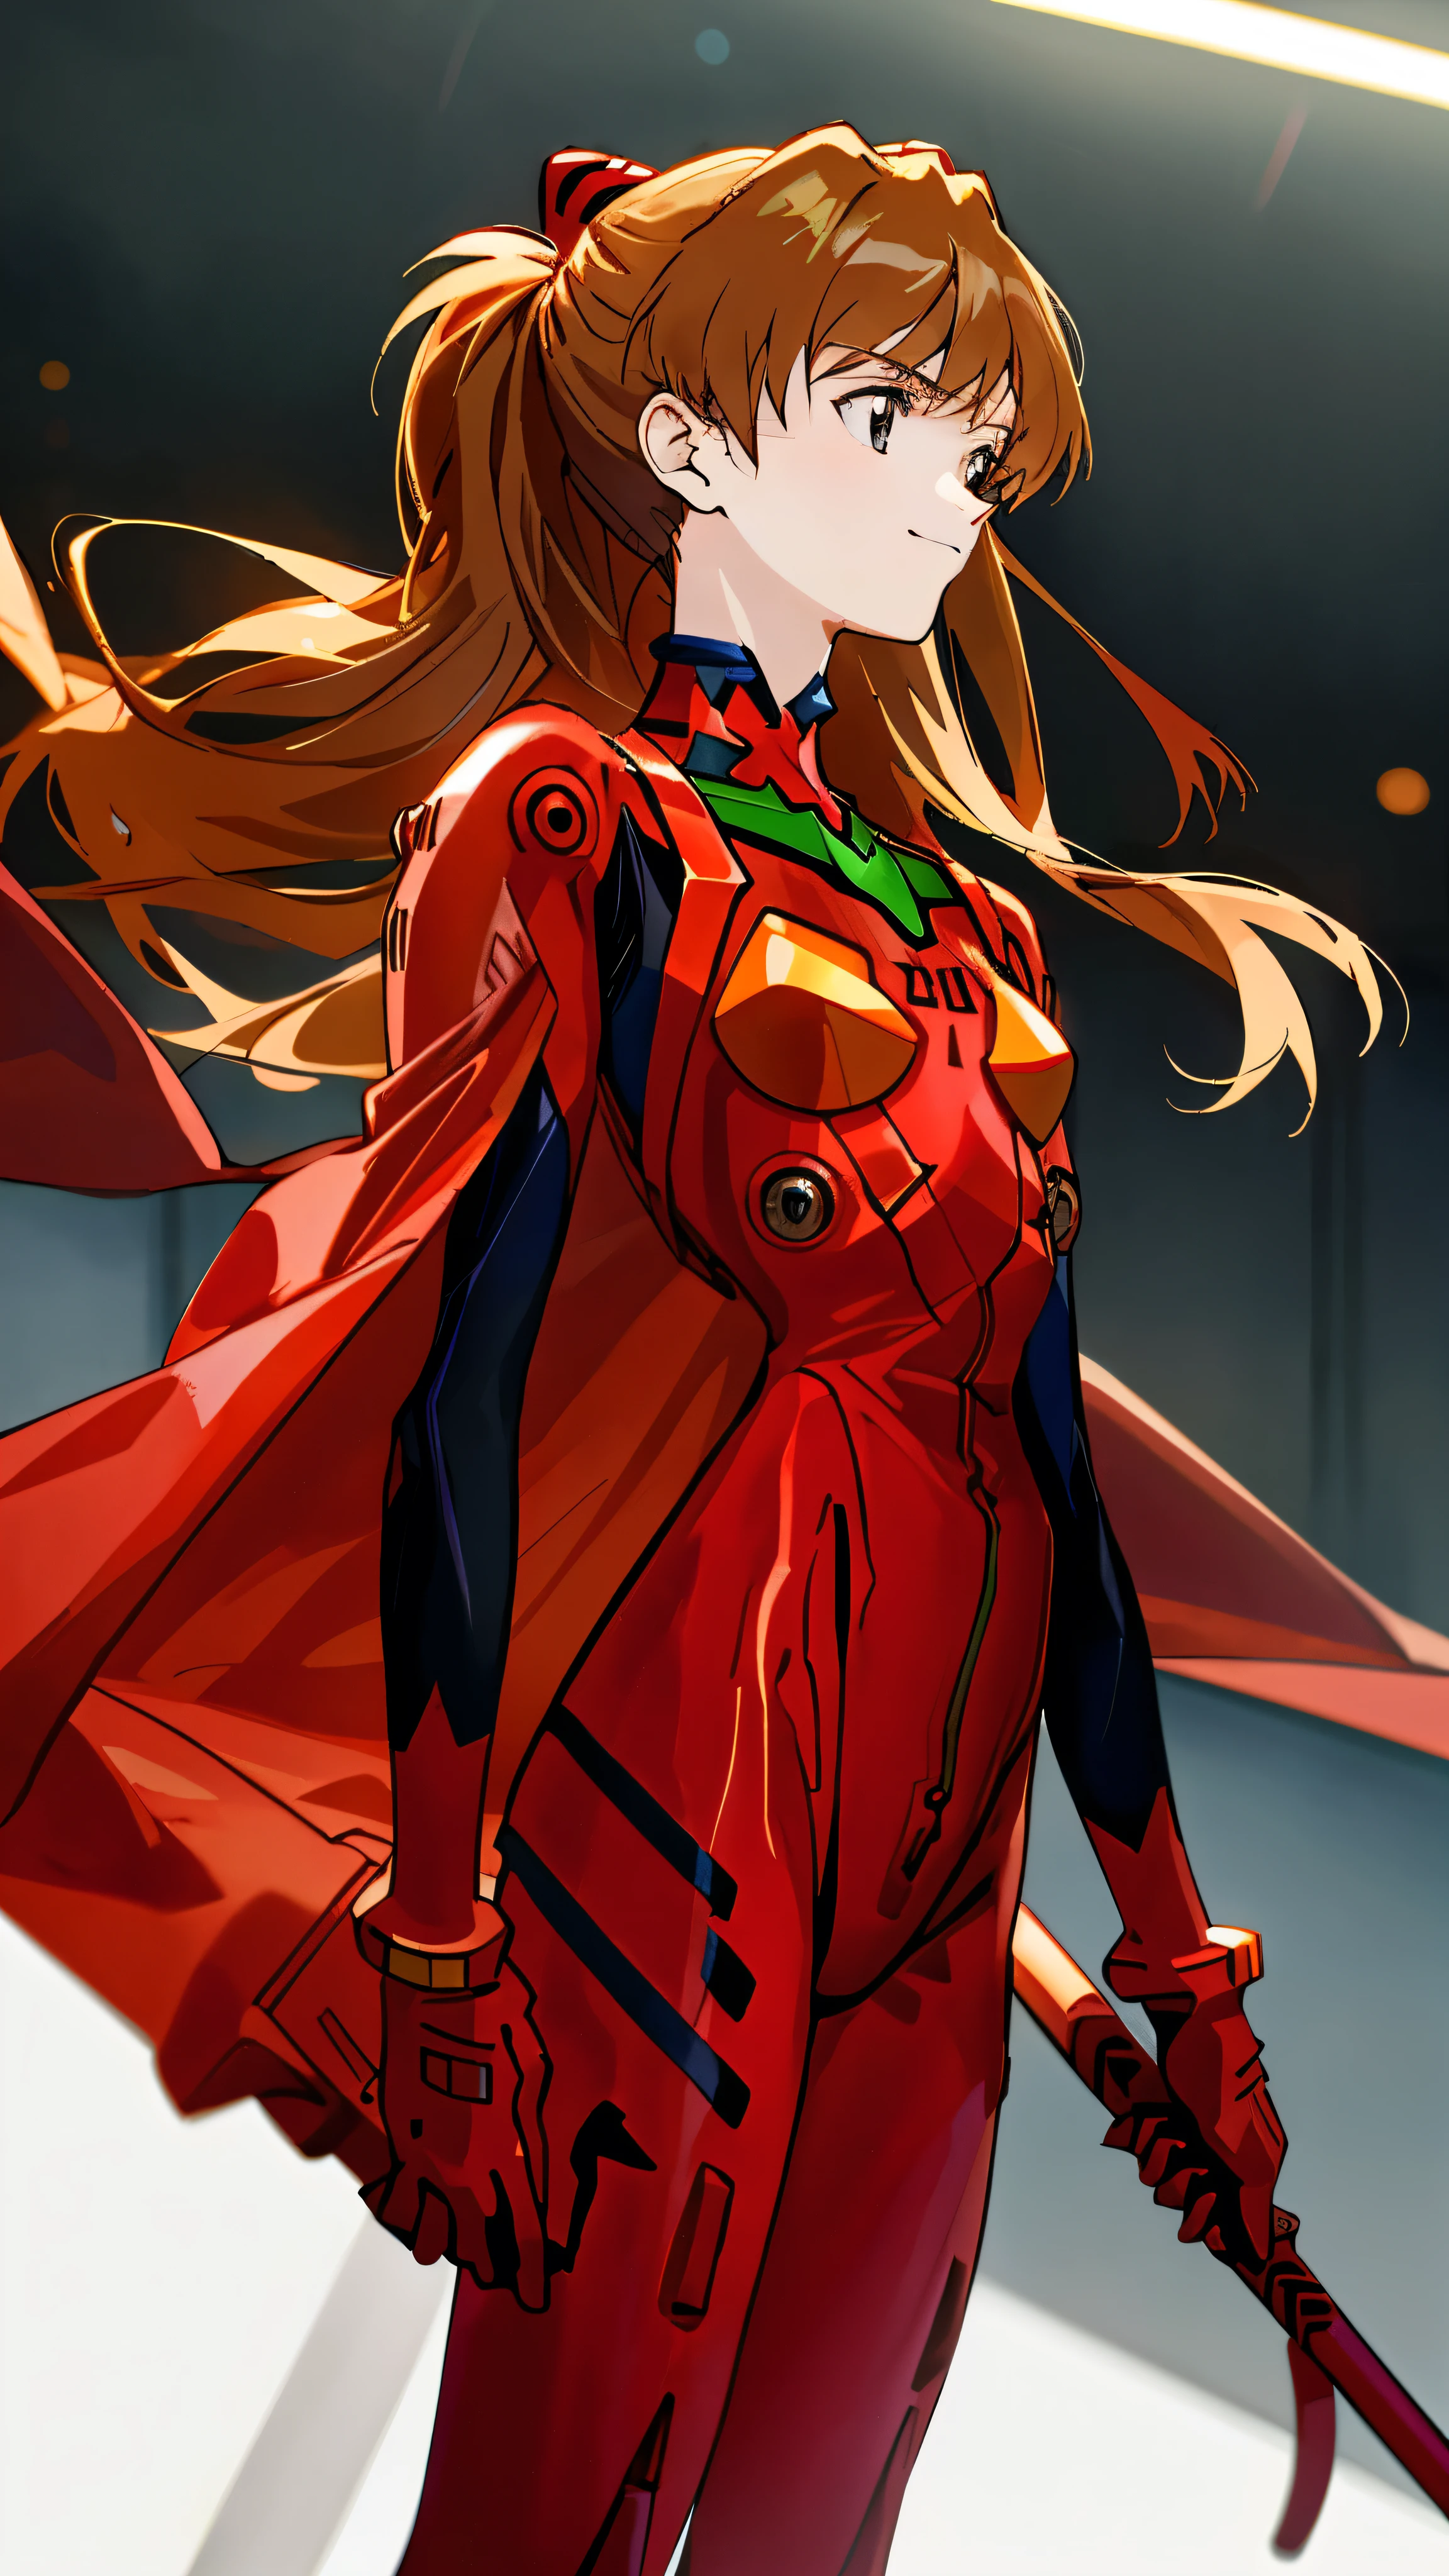 Anime girl standing solo in a Neon Genesis EVANGELION scene, showcasing the 19-year-old Asuka Langley. With her short, stylish bangs framing her detailed, hazel brown eyes, she dons a high-resolution, original outfit, featuring a white knight long cape attached at the waistline in a sheath. Her medium-sized bust is concealed by a red armored suit, and she exudes a confident smile while looking directly at the audience. The background is a beautifully crafted Western-style room adorned with neon elements, creating a surreal atmosphere. Asuka confidently places her hand on her chest, accentu